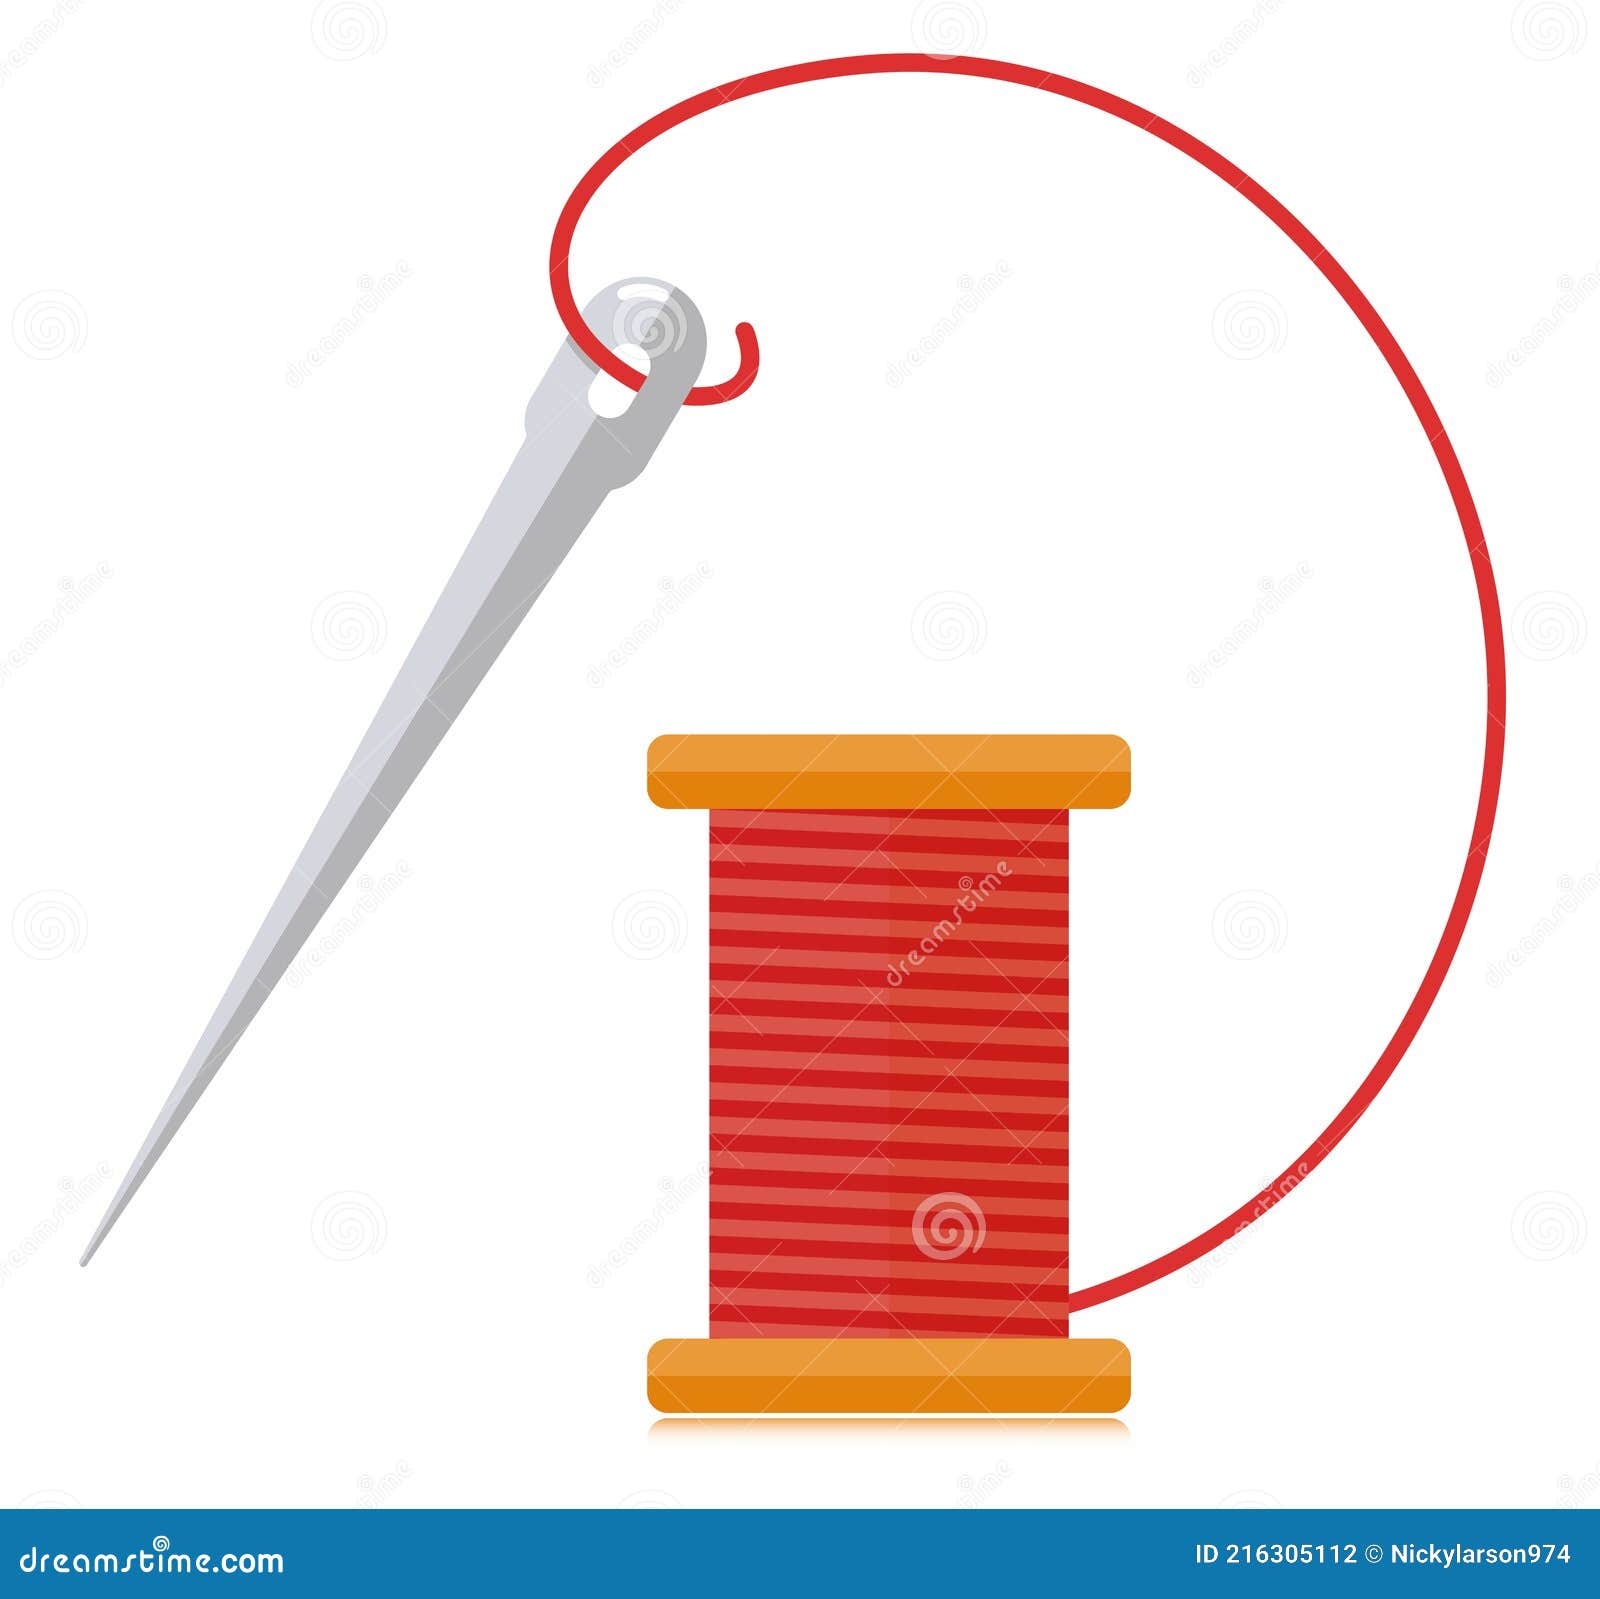 Spool of thread and needle stock vector. Illustration of icon - 216305112